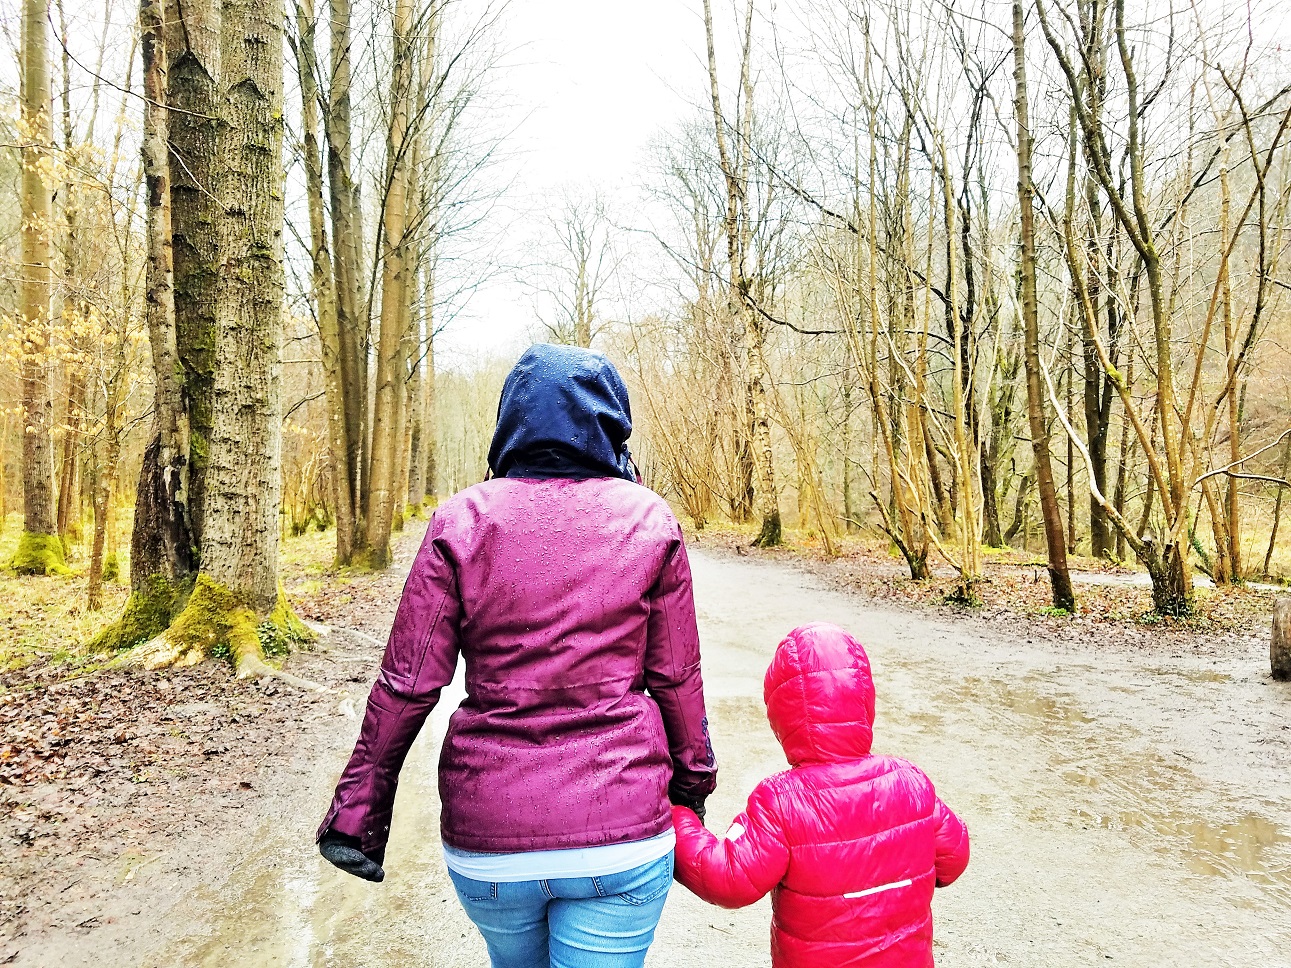 Don't Fall For This Happy Mum Scam - mother holding hands with child in a forest